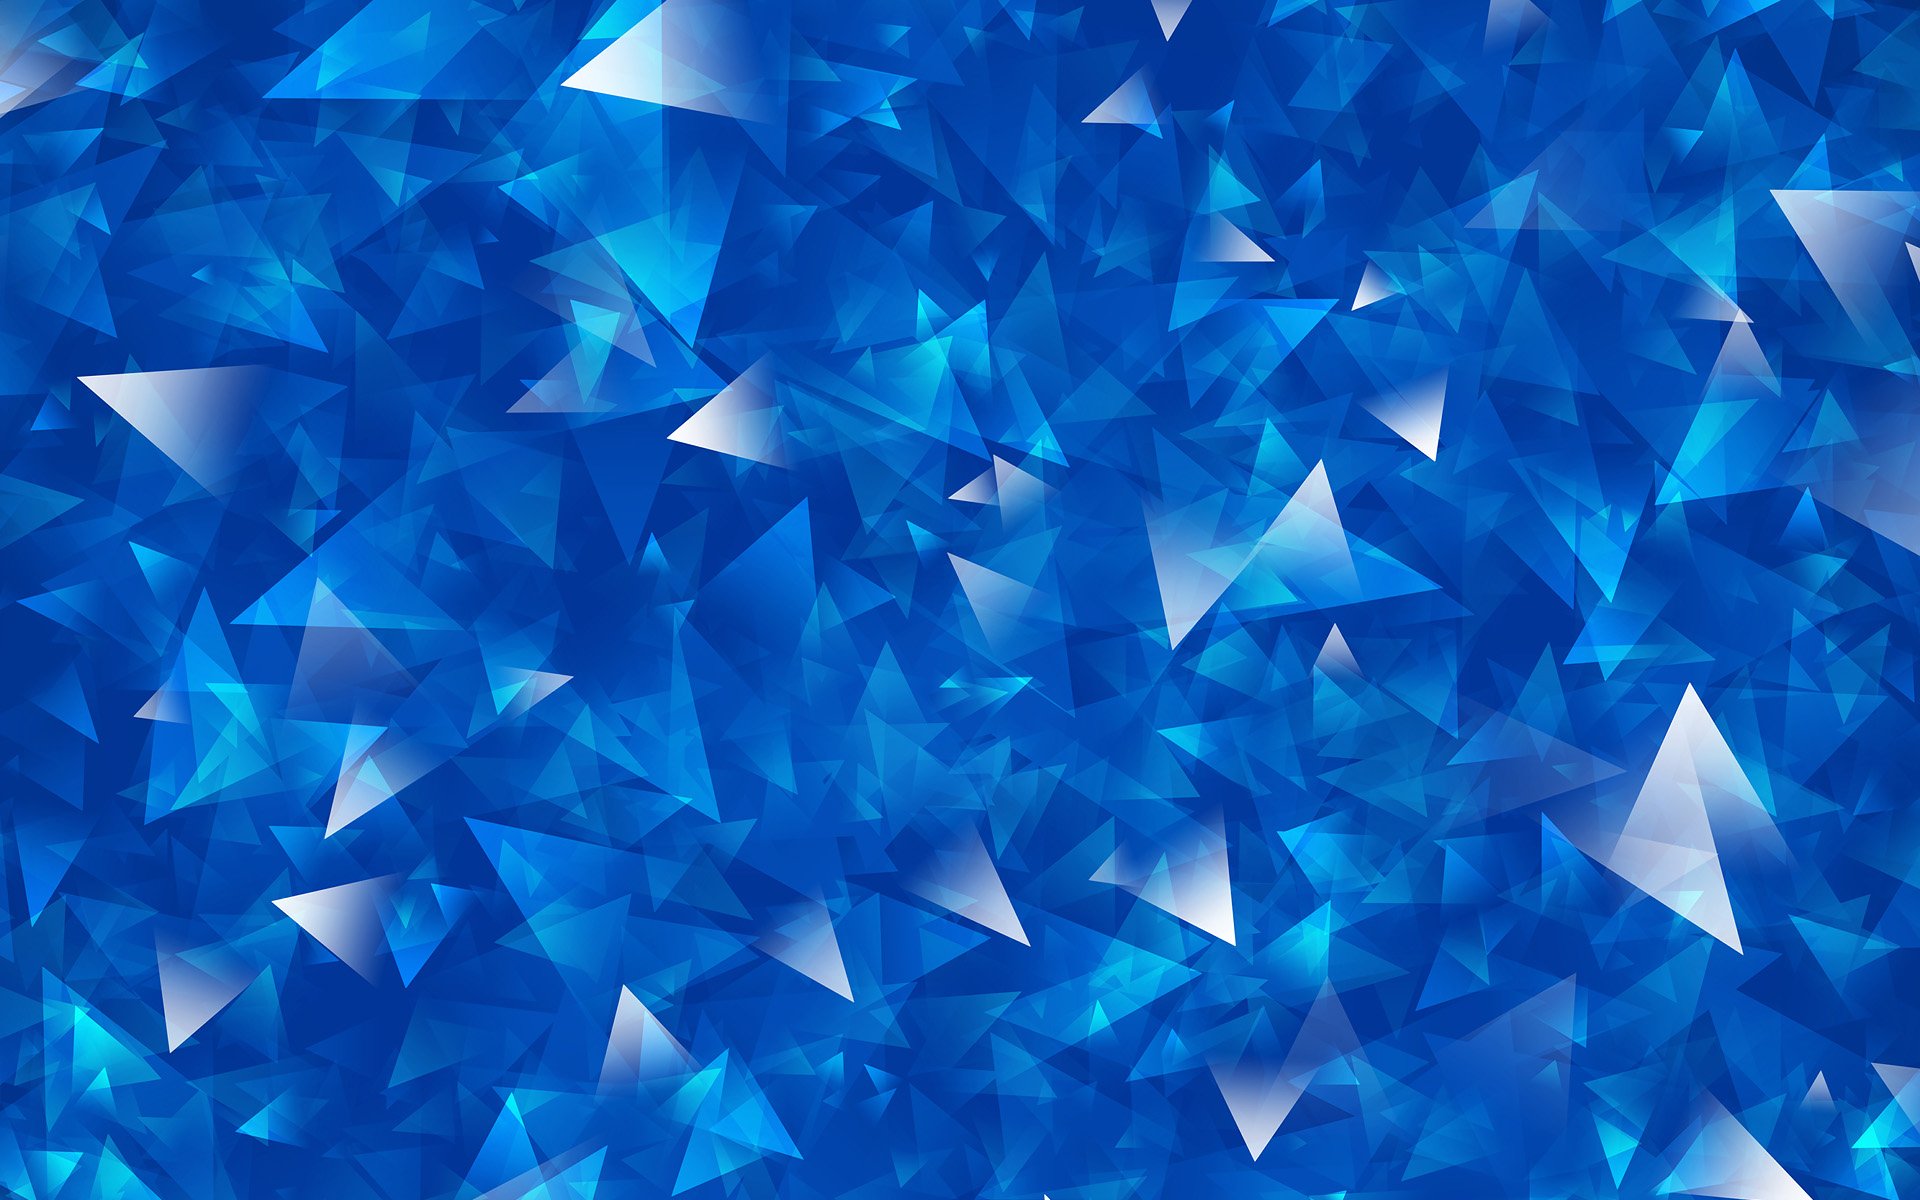 Cool Blue Computer Wallpapers. Feel free to use these Cool Blue Computer images as a background for your PC, laptop, Android phone, iPhone or tablet.